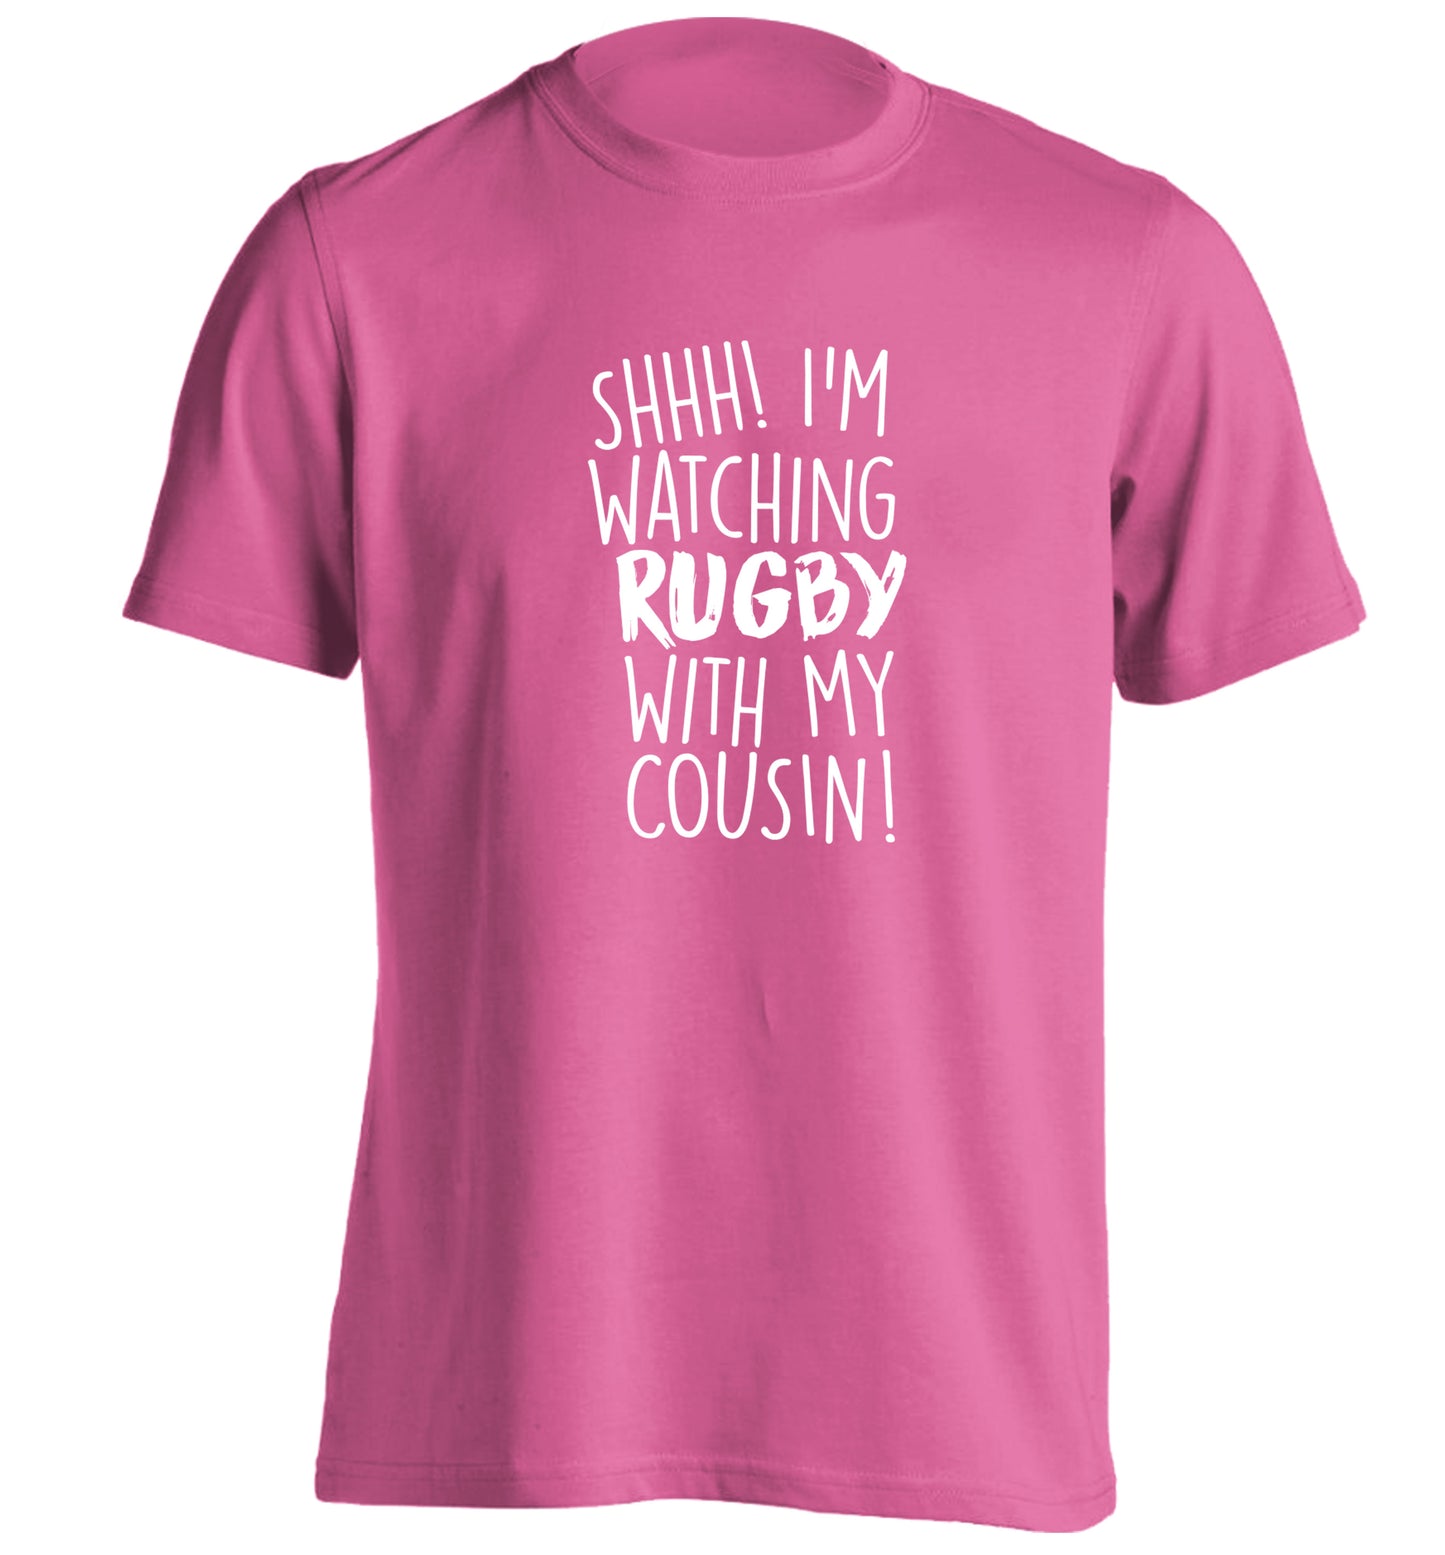 Shhh I'm watching rugby with my cousin adults unisex pink Tshirt 2XL